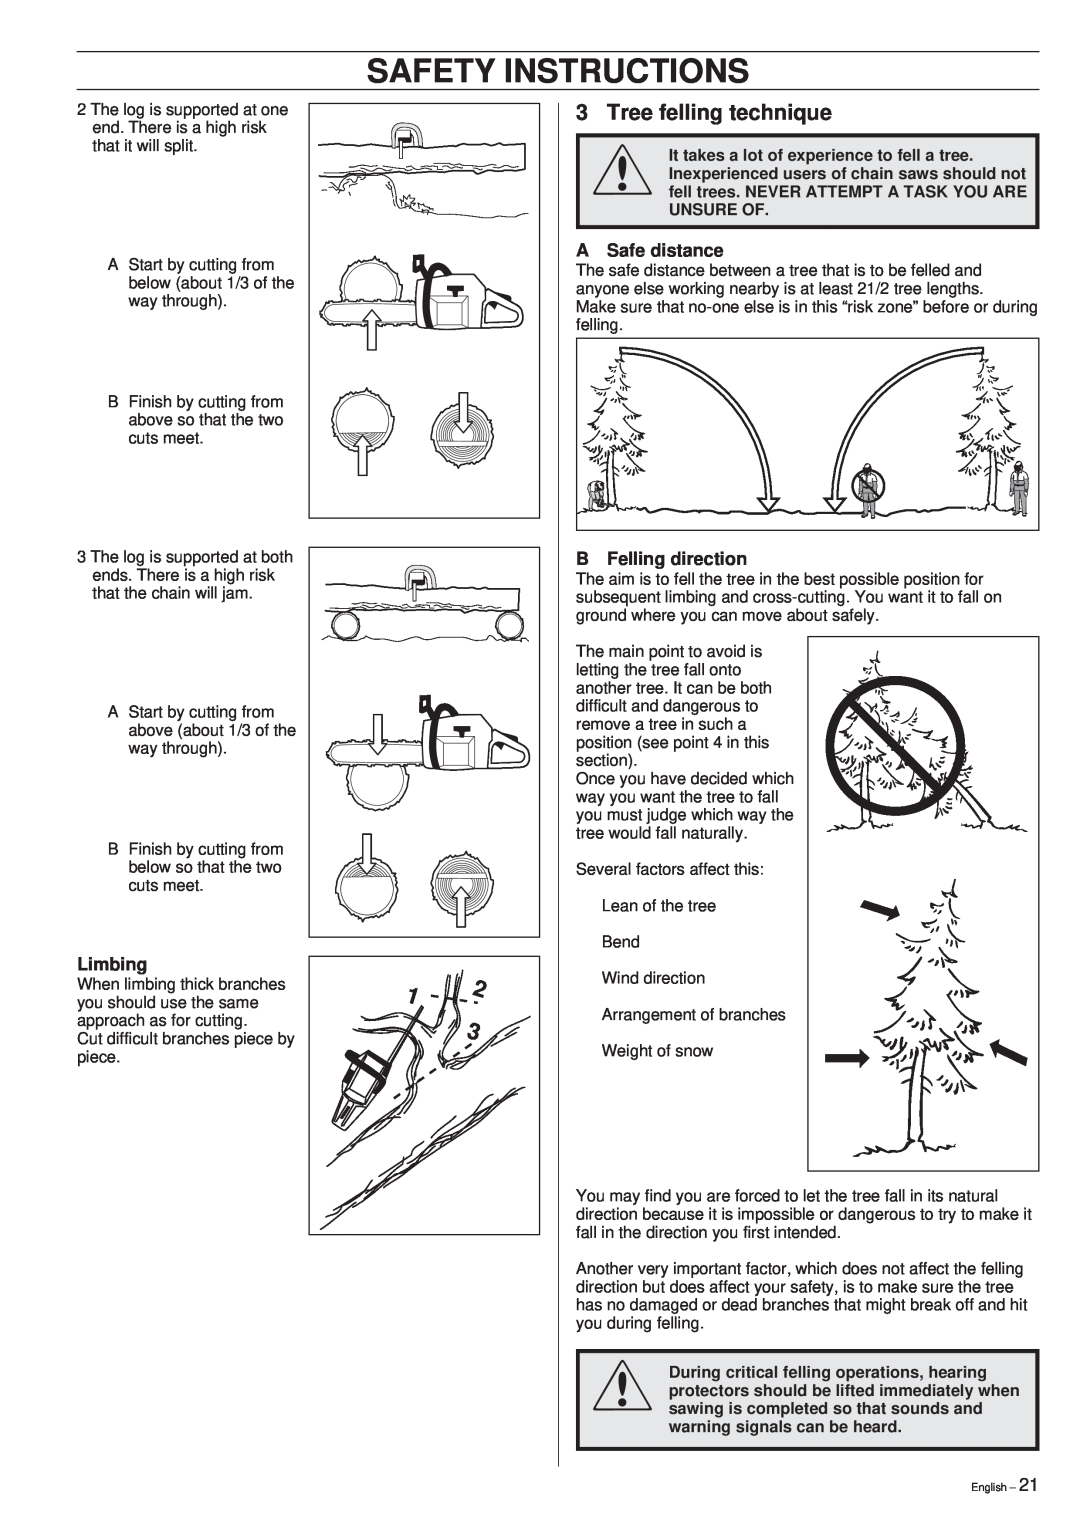 Husqvarna 40 manual 3Tree felling technique, Safety Instructions, A Safe distance, Limbing, B Felling direction 